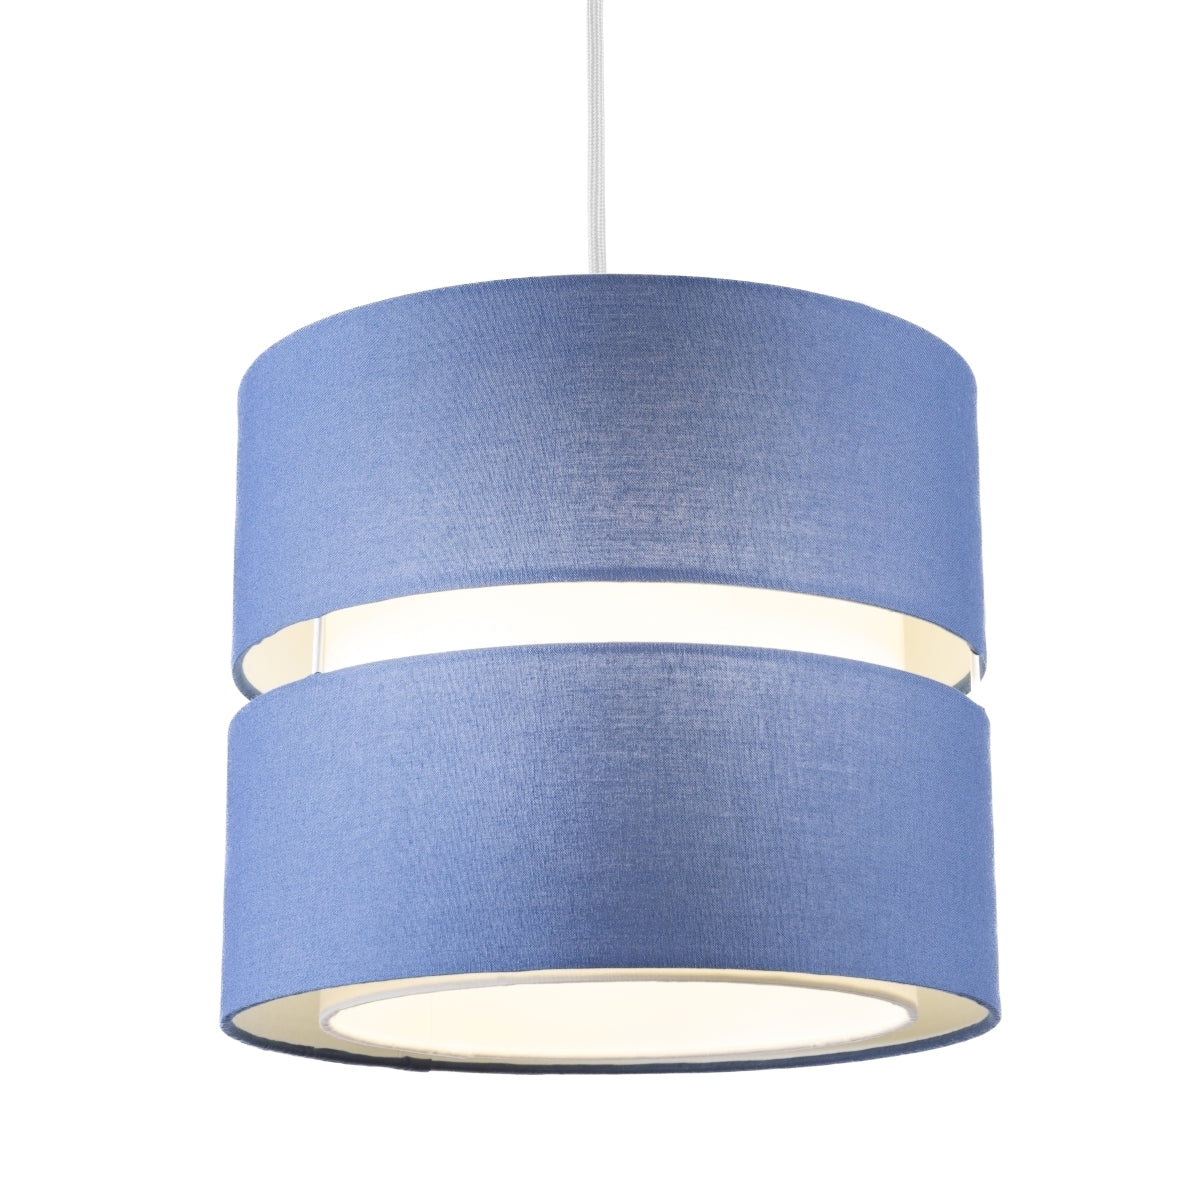 Our Gayle easy fit two tiered luxury fabric double layered shade is contemporary in its appearance and we have designed the shade to suit a range of interiors. Easy to fit simply attached to an existing pendant flitting.  It is crafted from high quality fabric material in two layers and complimented with a white inner which looks beautiful when light shines through. The shade has been made to fit both a ceiling light or lamp base.